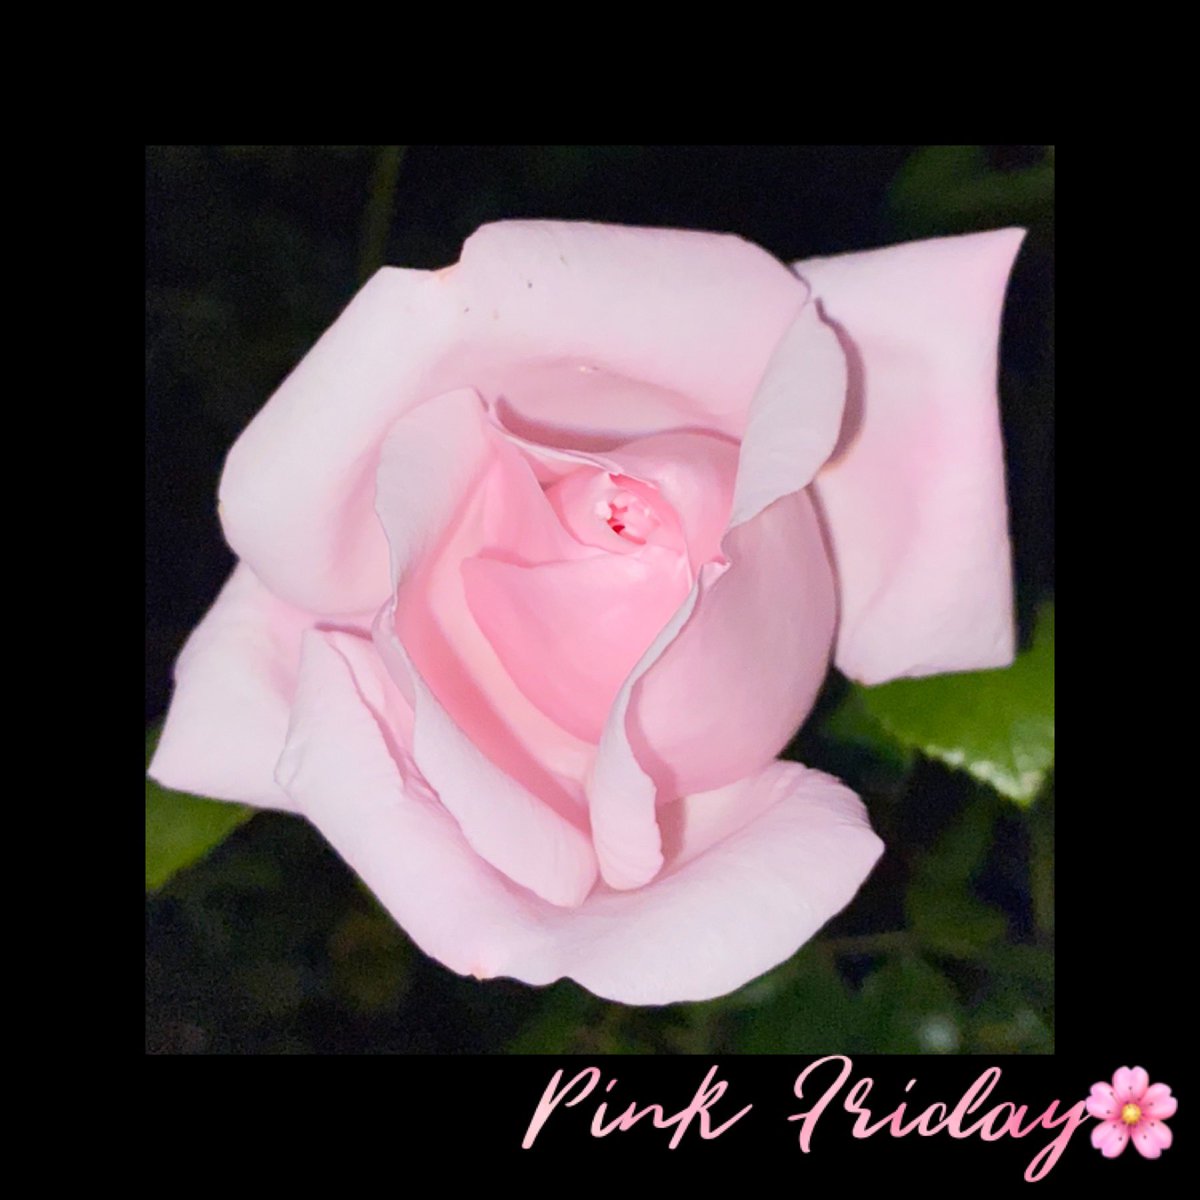 Here’s our #PinkFriday moment 2 cut through the grime of news & 4 a peaceful #weekend, lovely people!🌸🤗
Still, while taking care of u & urs, spare a thought 4 the less fortunate, those feeling alone, 4 #Ukraine, their people. Give #Kindness💗🌸#Pink #rose #FridayMotivation💗